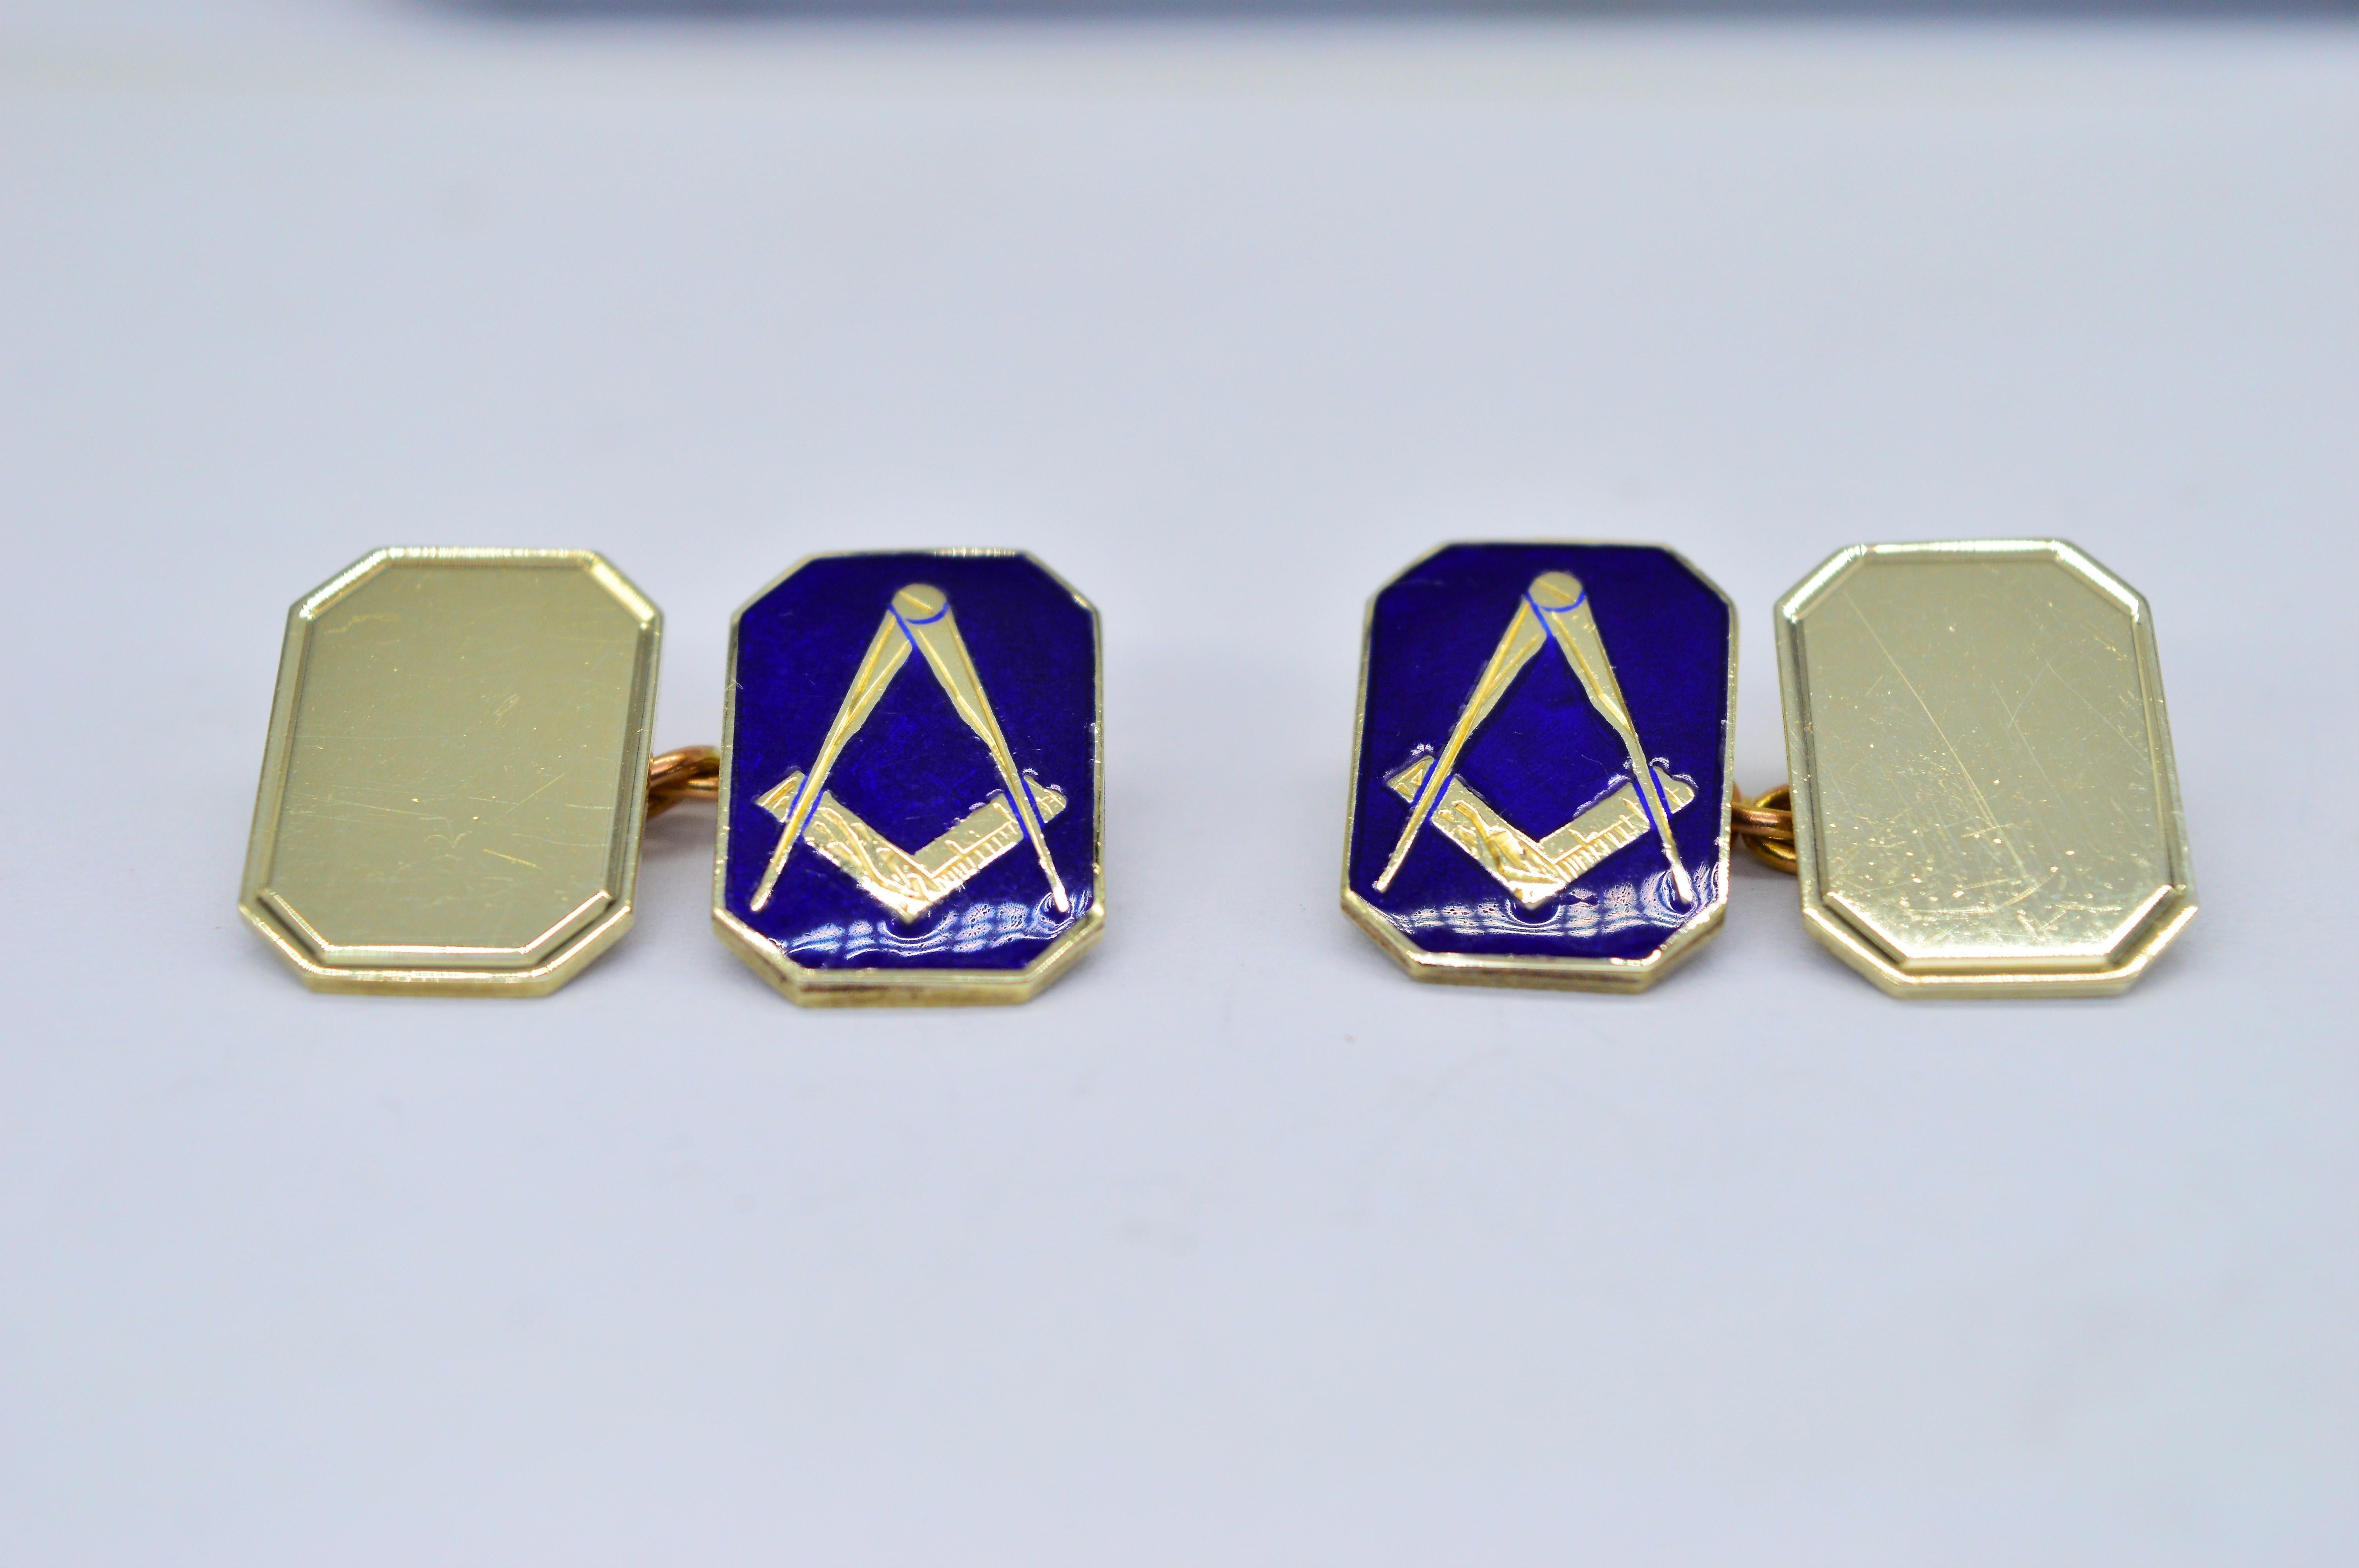 A set of 9ct gold cufflinks 

Featuring a Freemason blue enamel design

9.18g

We have sold to the set of Hit shows like Peaky Blinders and Outlander as well as to Buckingham Palace so our items are truly fit for royalty.

Through a decade of